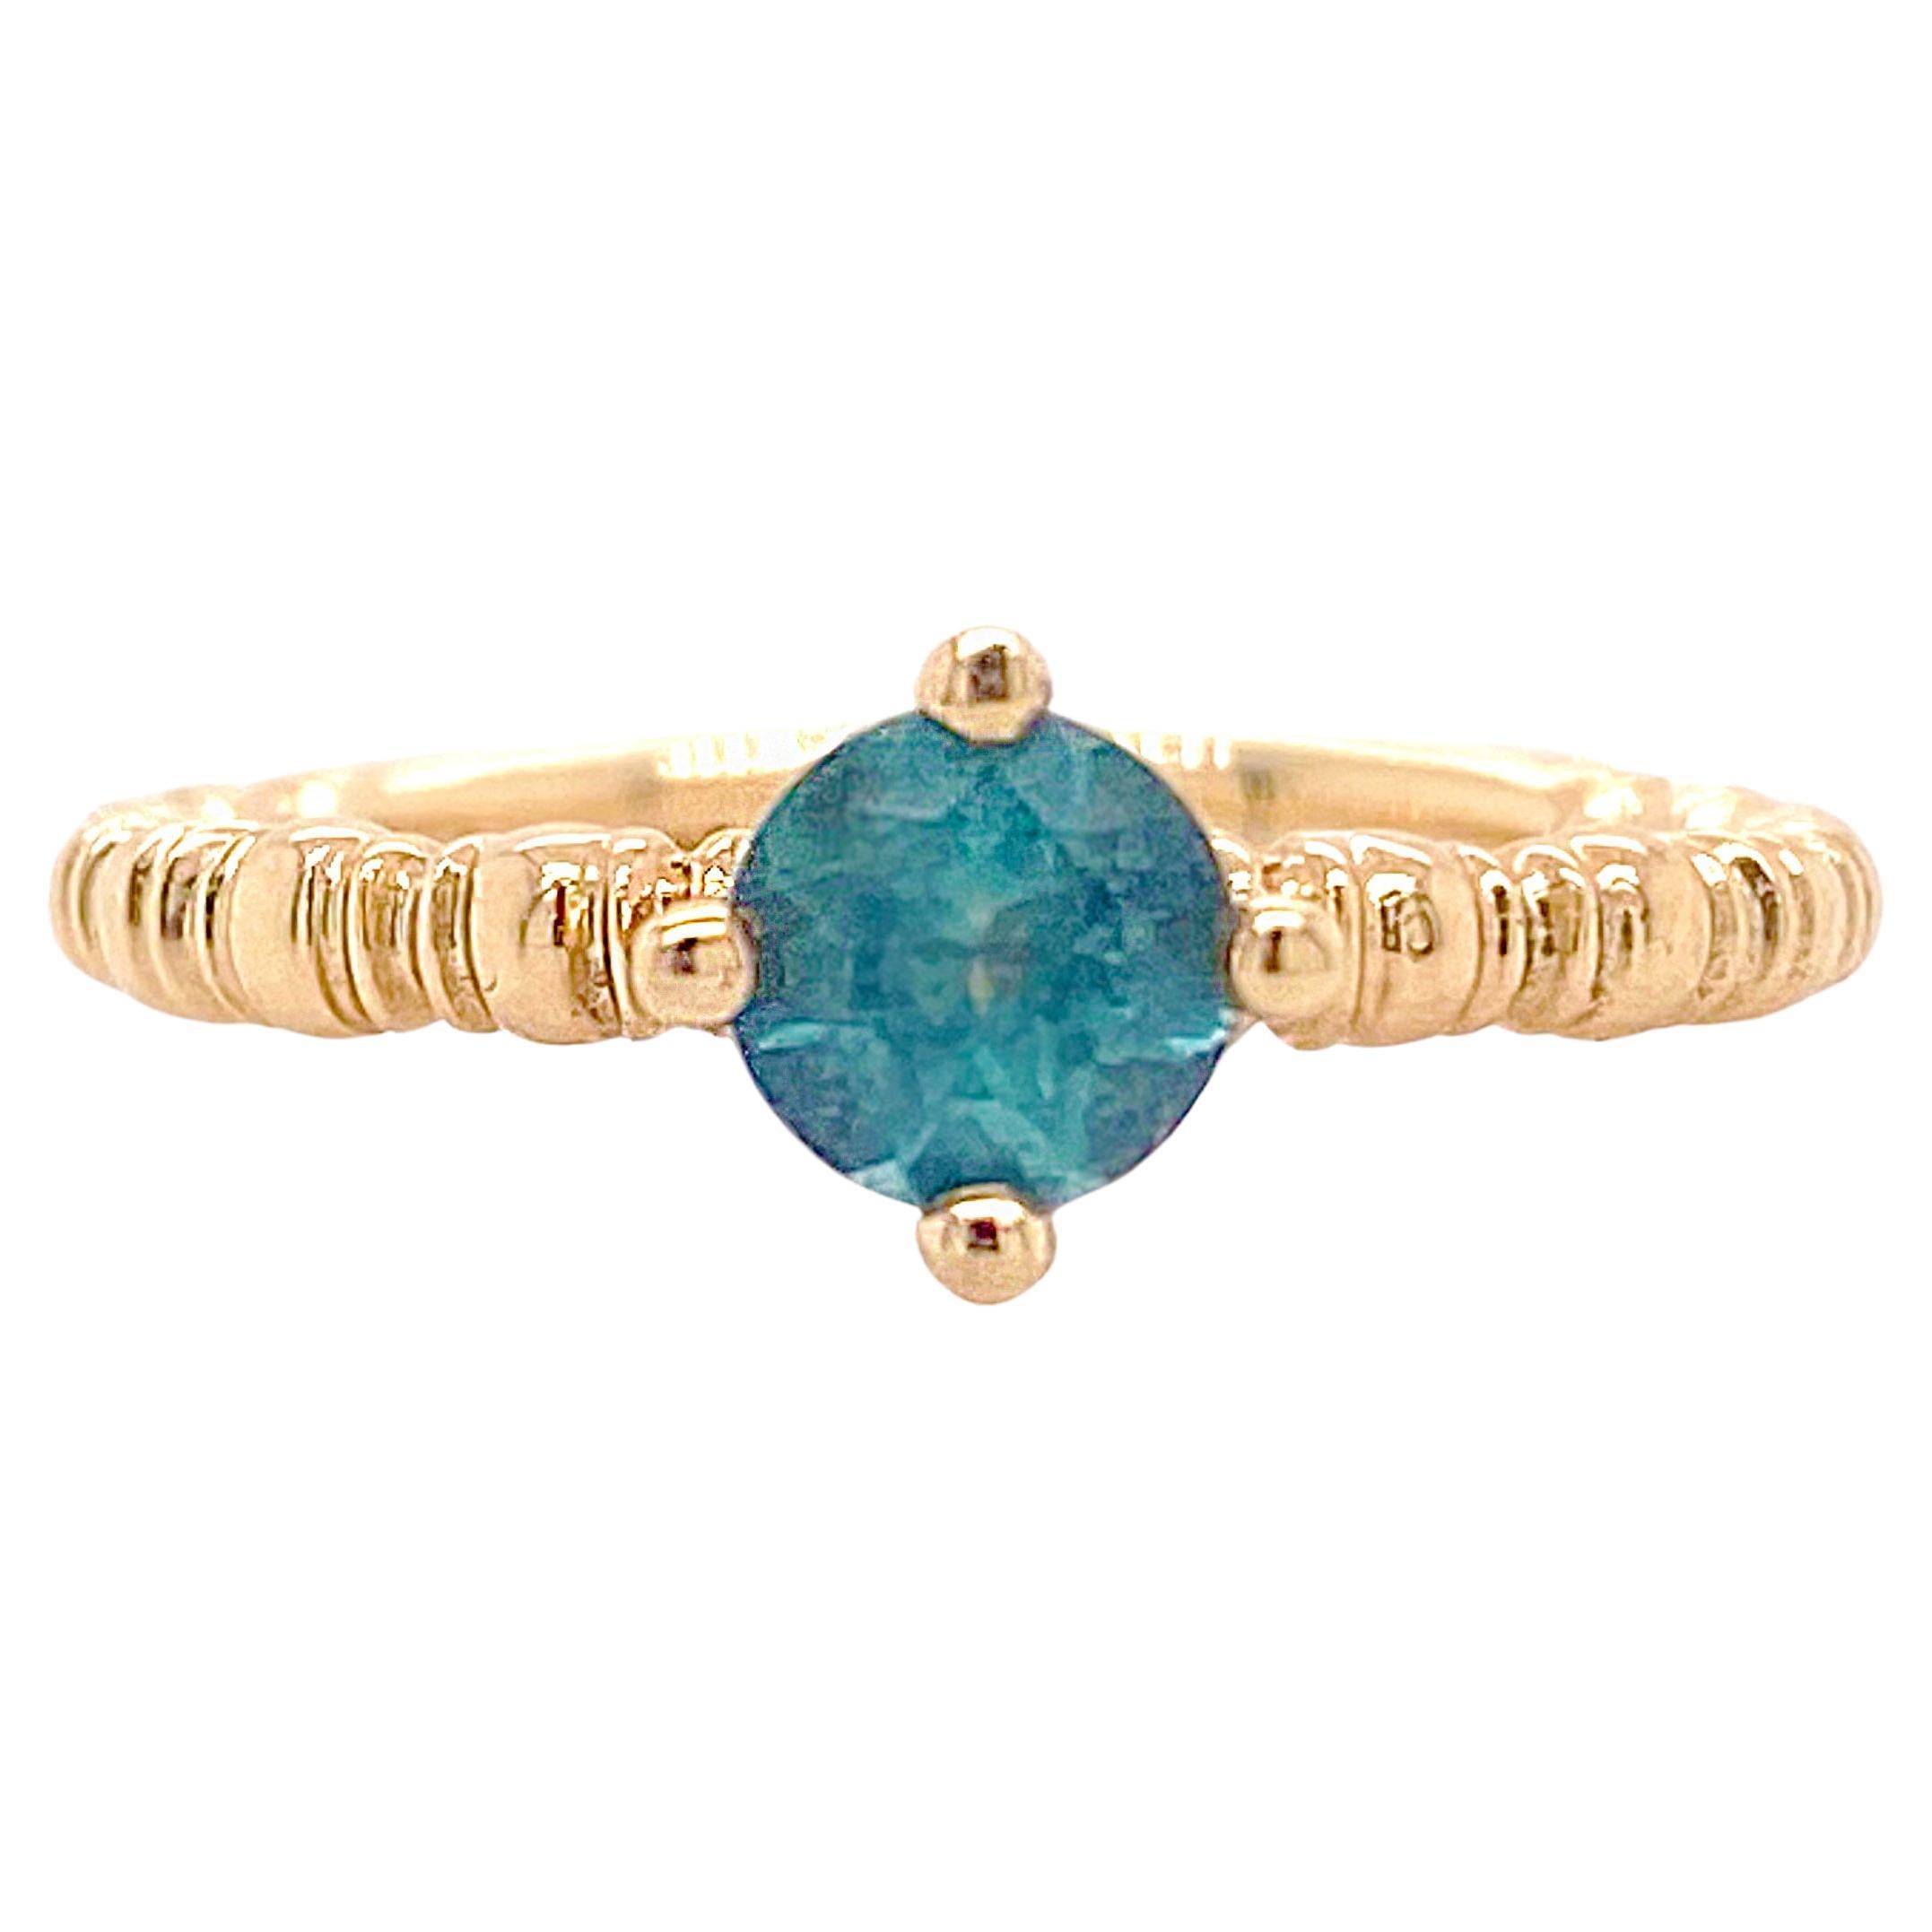 Solitaire Apatite Ring, Yellow Gold, Textured Band with Genuine Vibrant Apatite